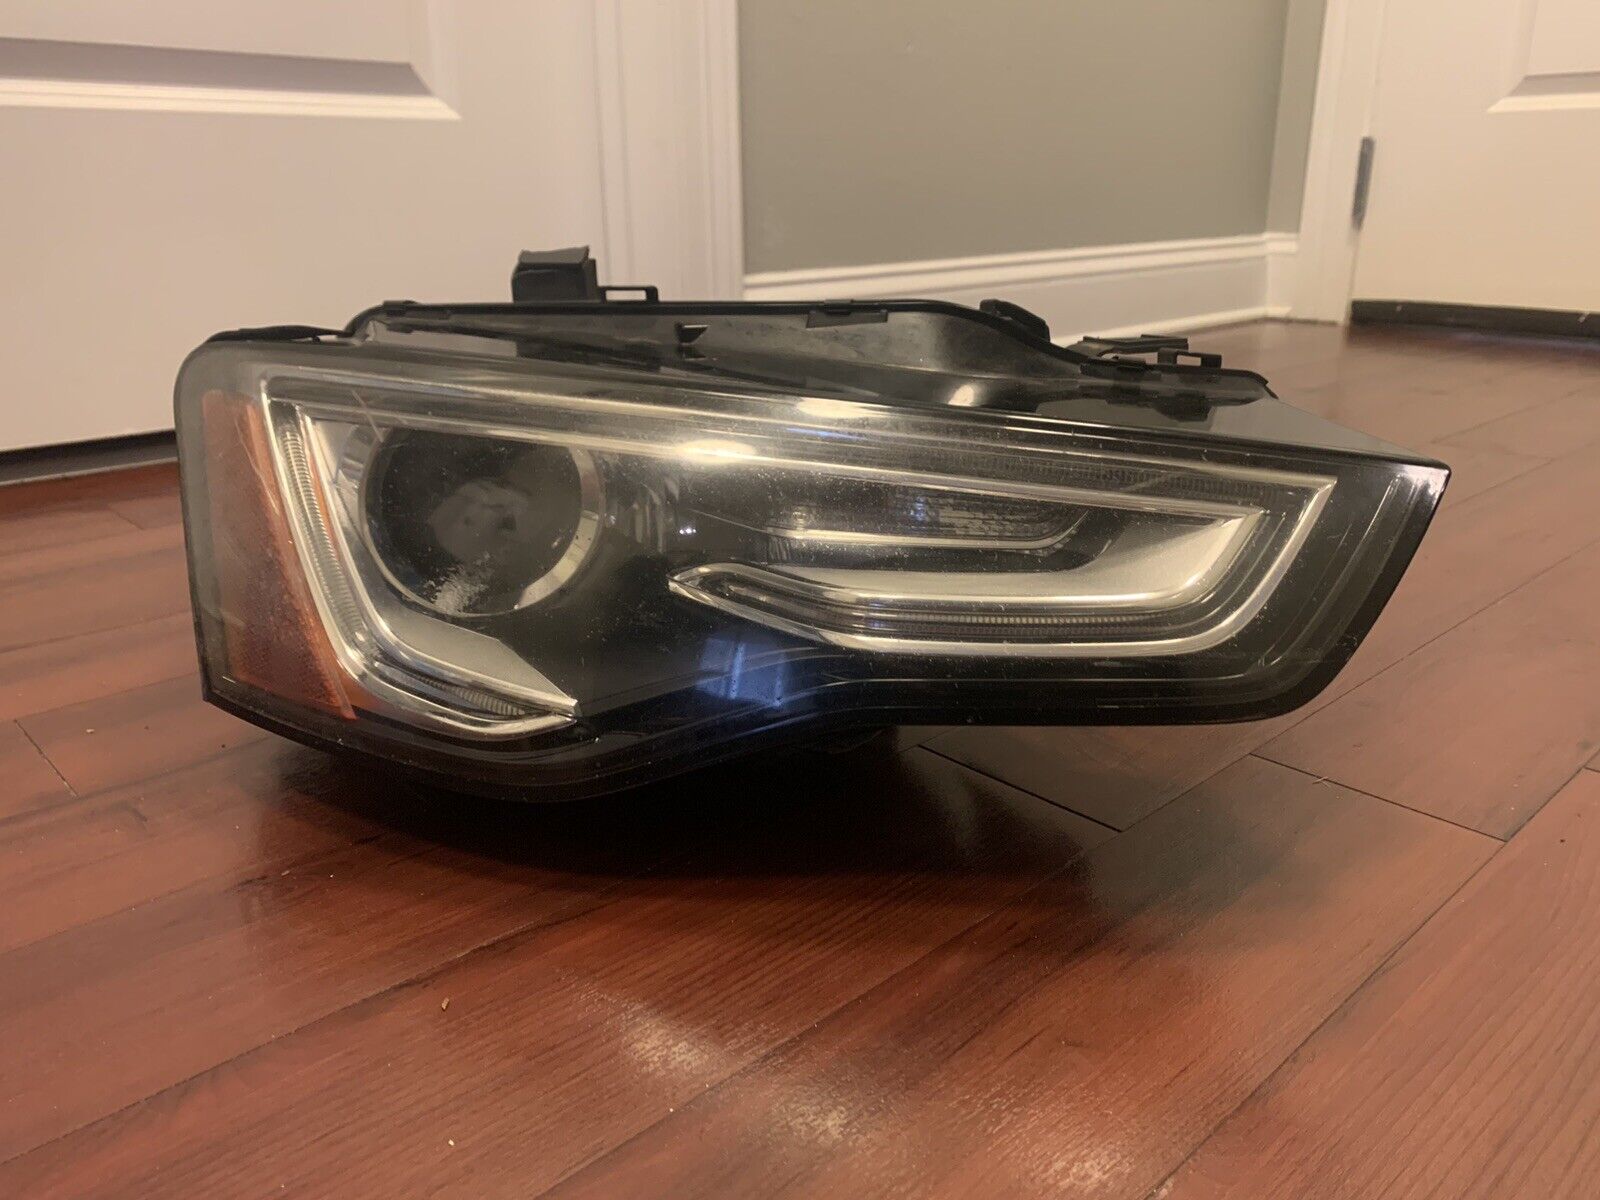 For 2013-2015 Audi RS5, S5, A5 Headlight Assembly Right Side OE-Xenon